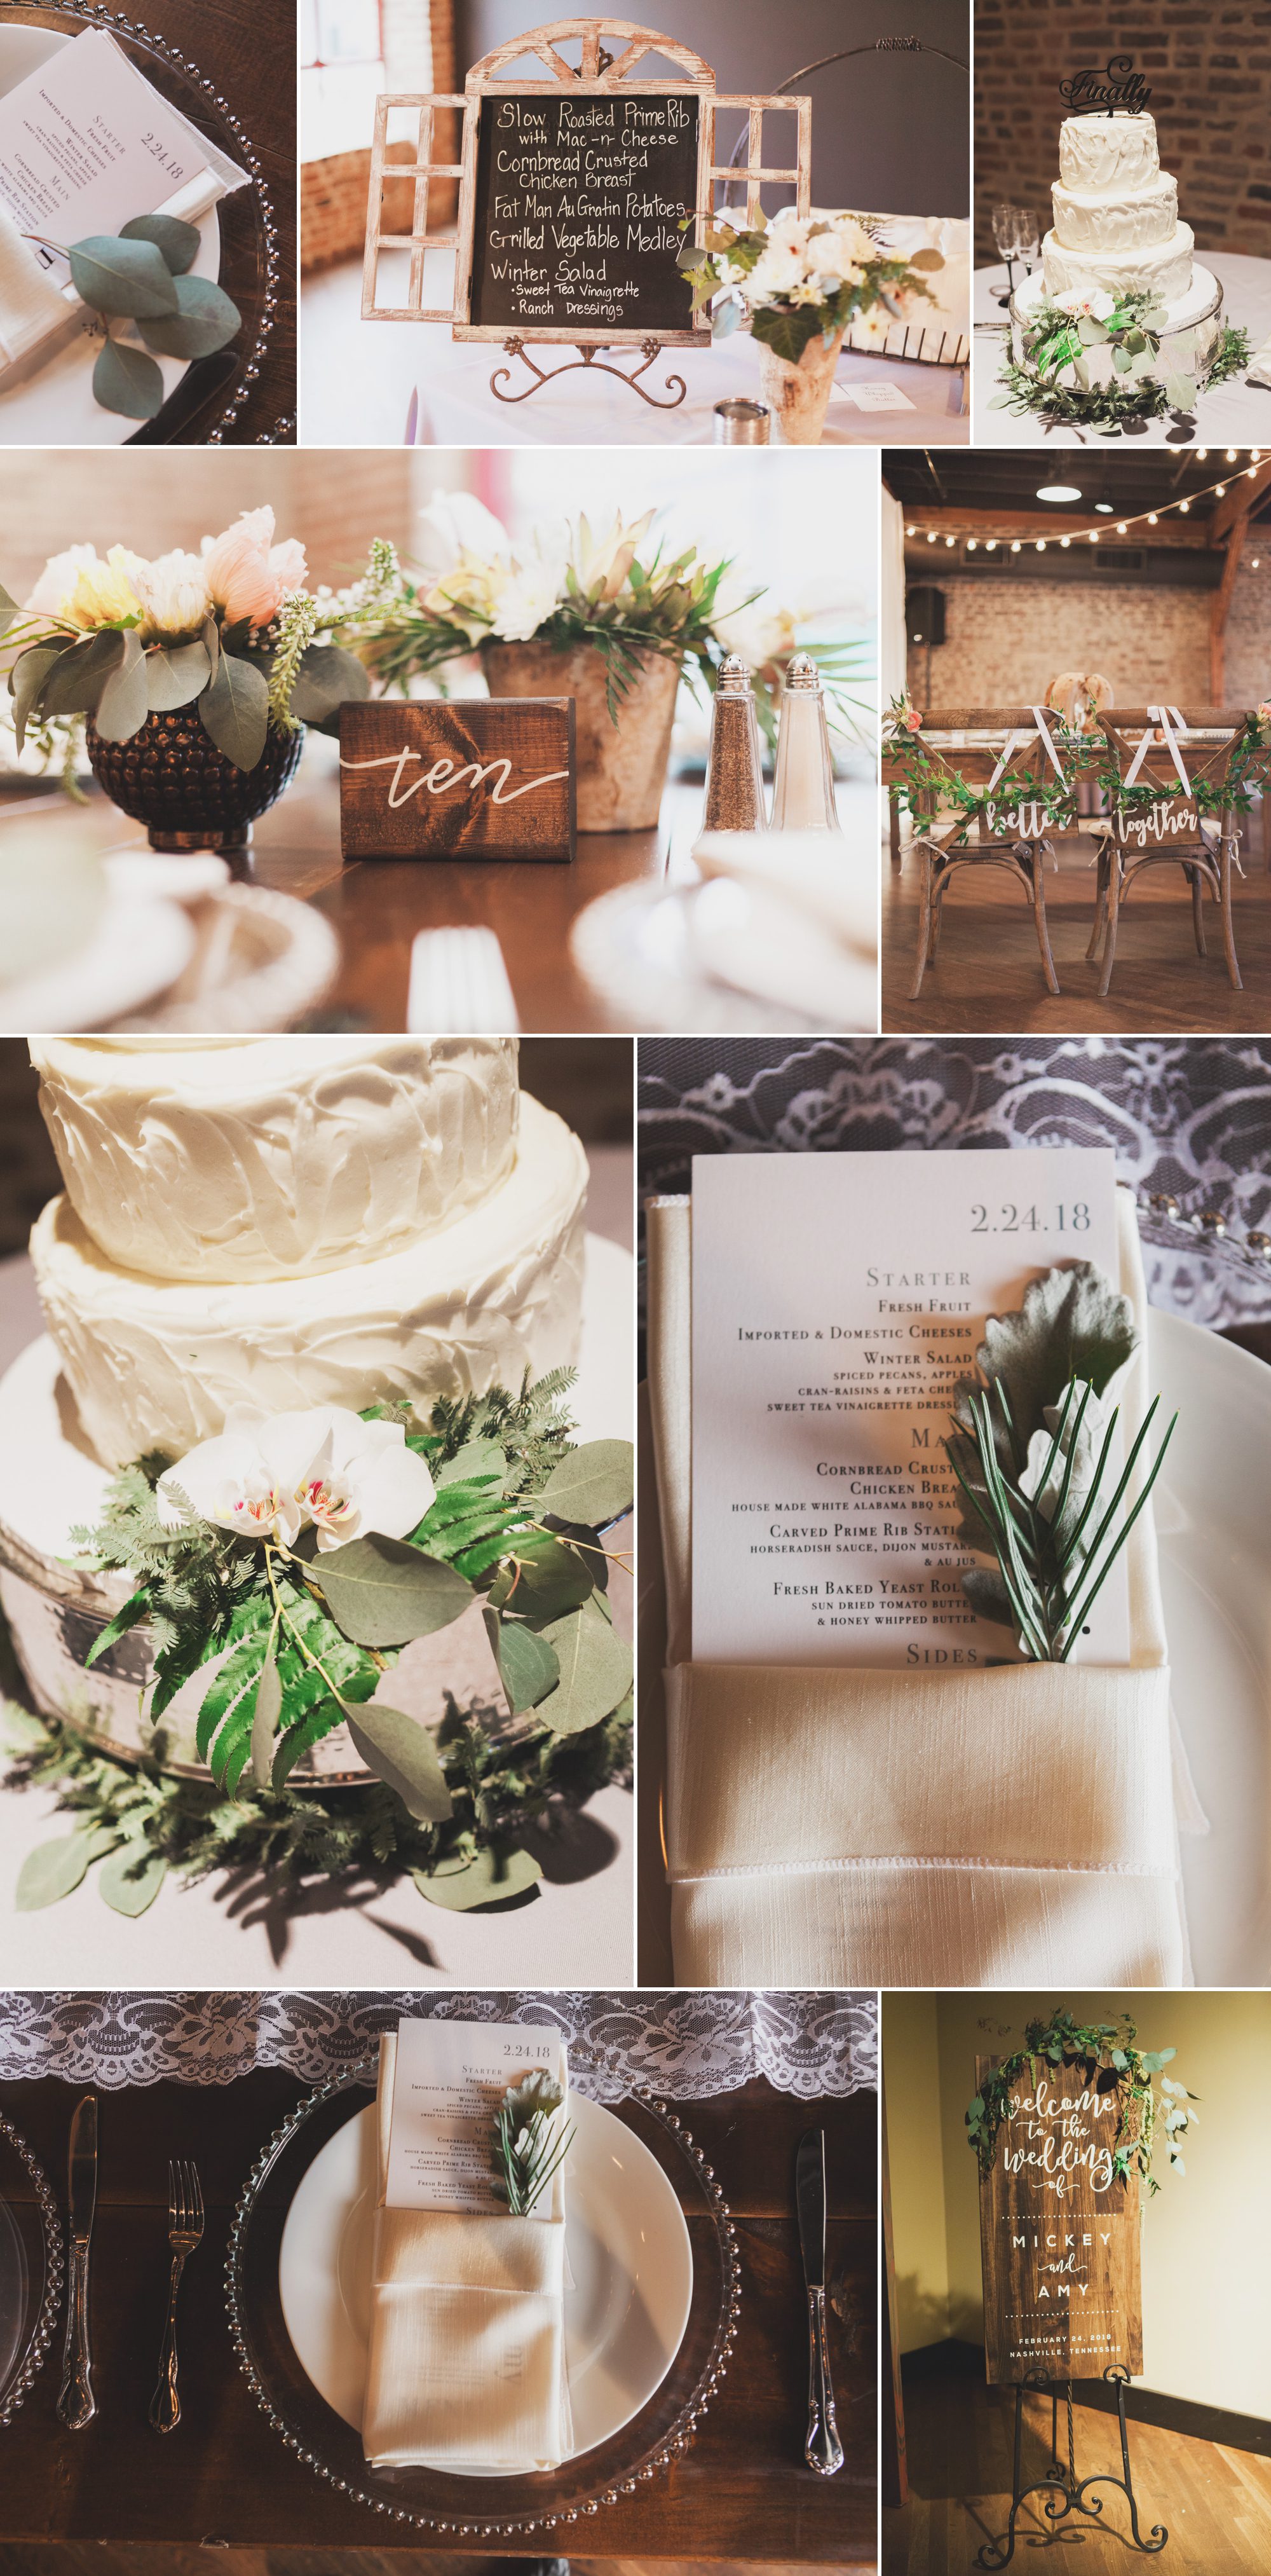 Gorgeous reception details after wedding  at Houston Station, Nashville TN. Photos by Krista Lee Photography.